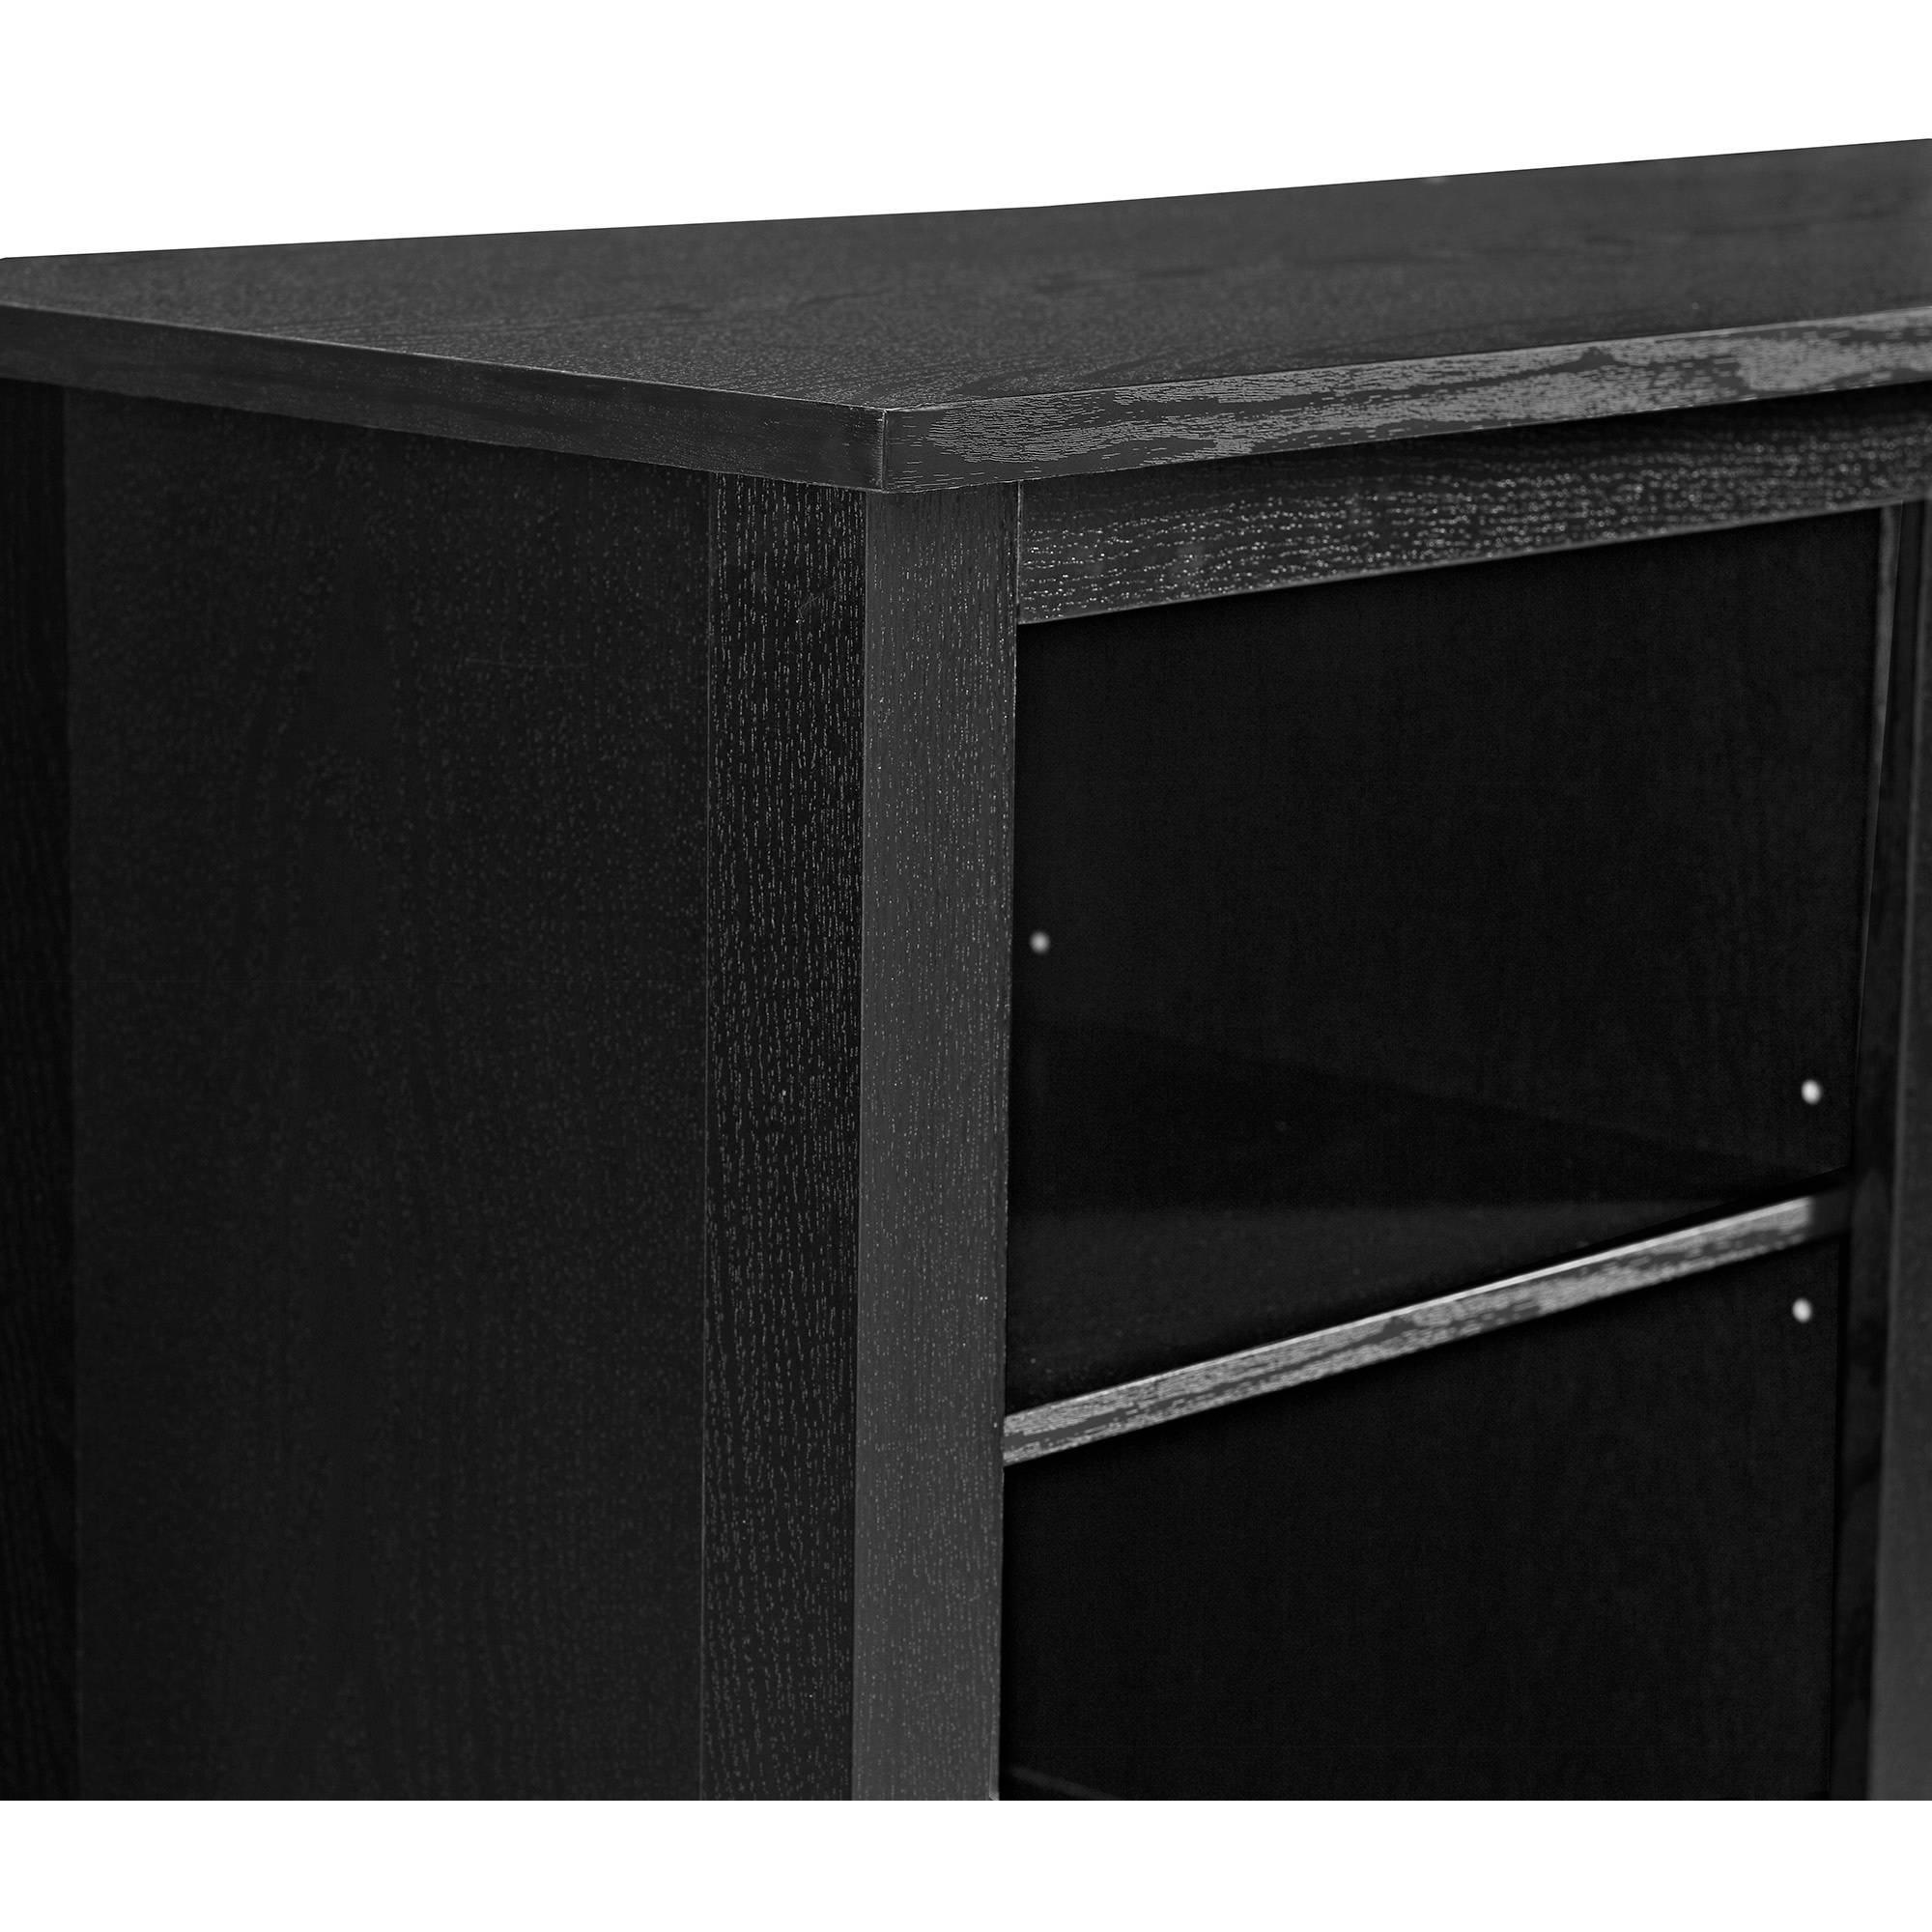 Walker Edison Traditional Fireplace TV Stand for TVs Up to 64" - Black - image 5 of 9